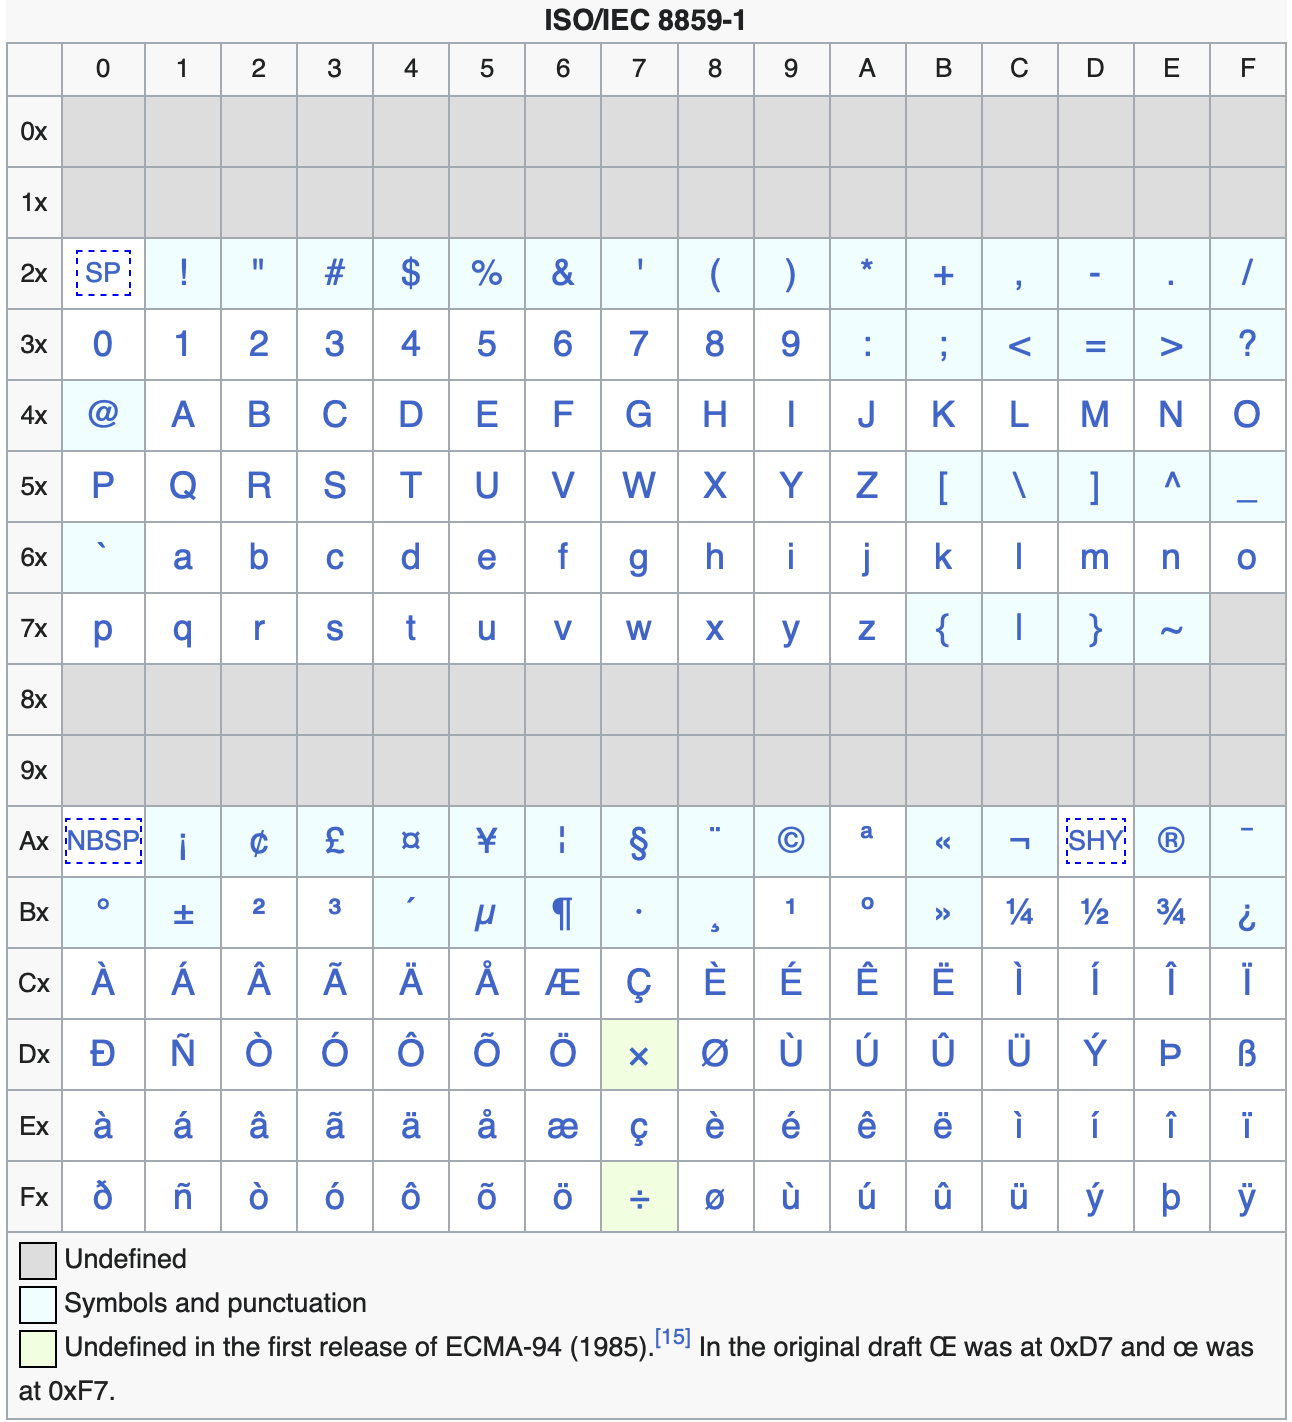 ISO 8859-1 chart, showing the characters in the Latin-1 encoding.